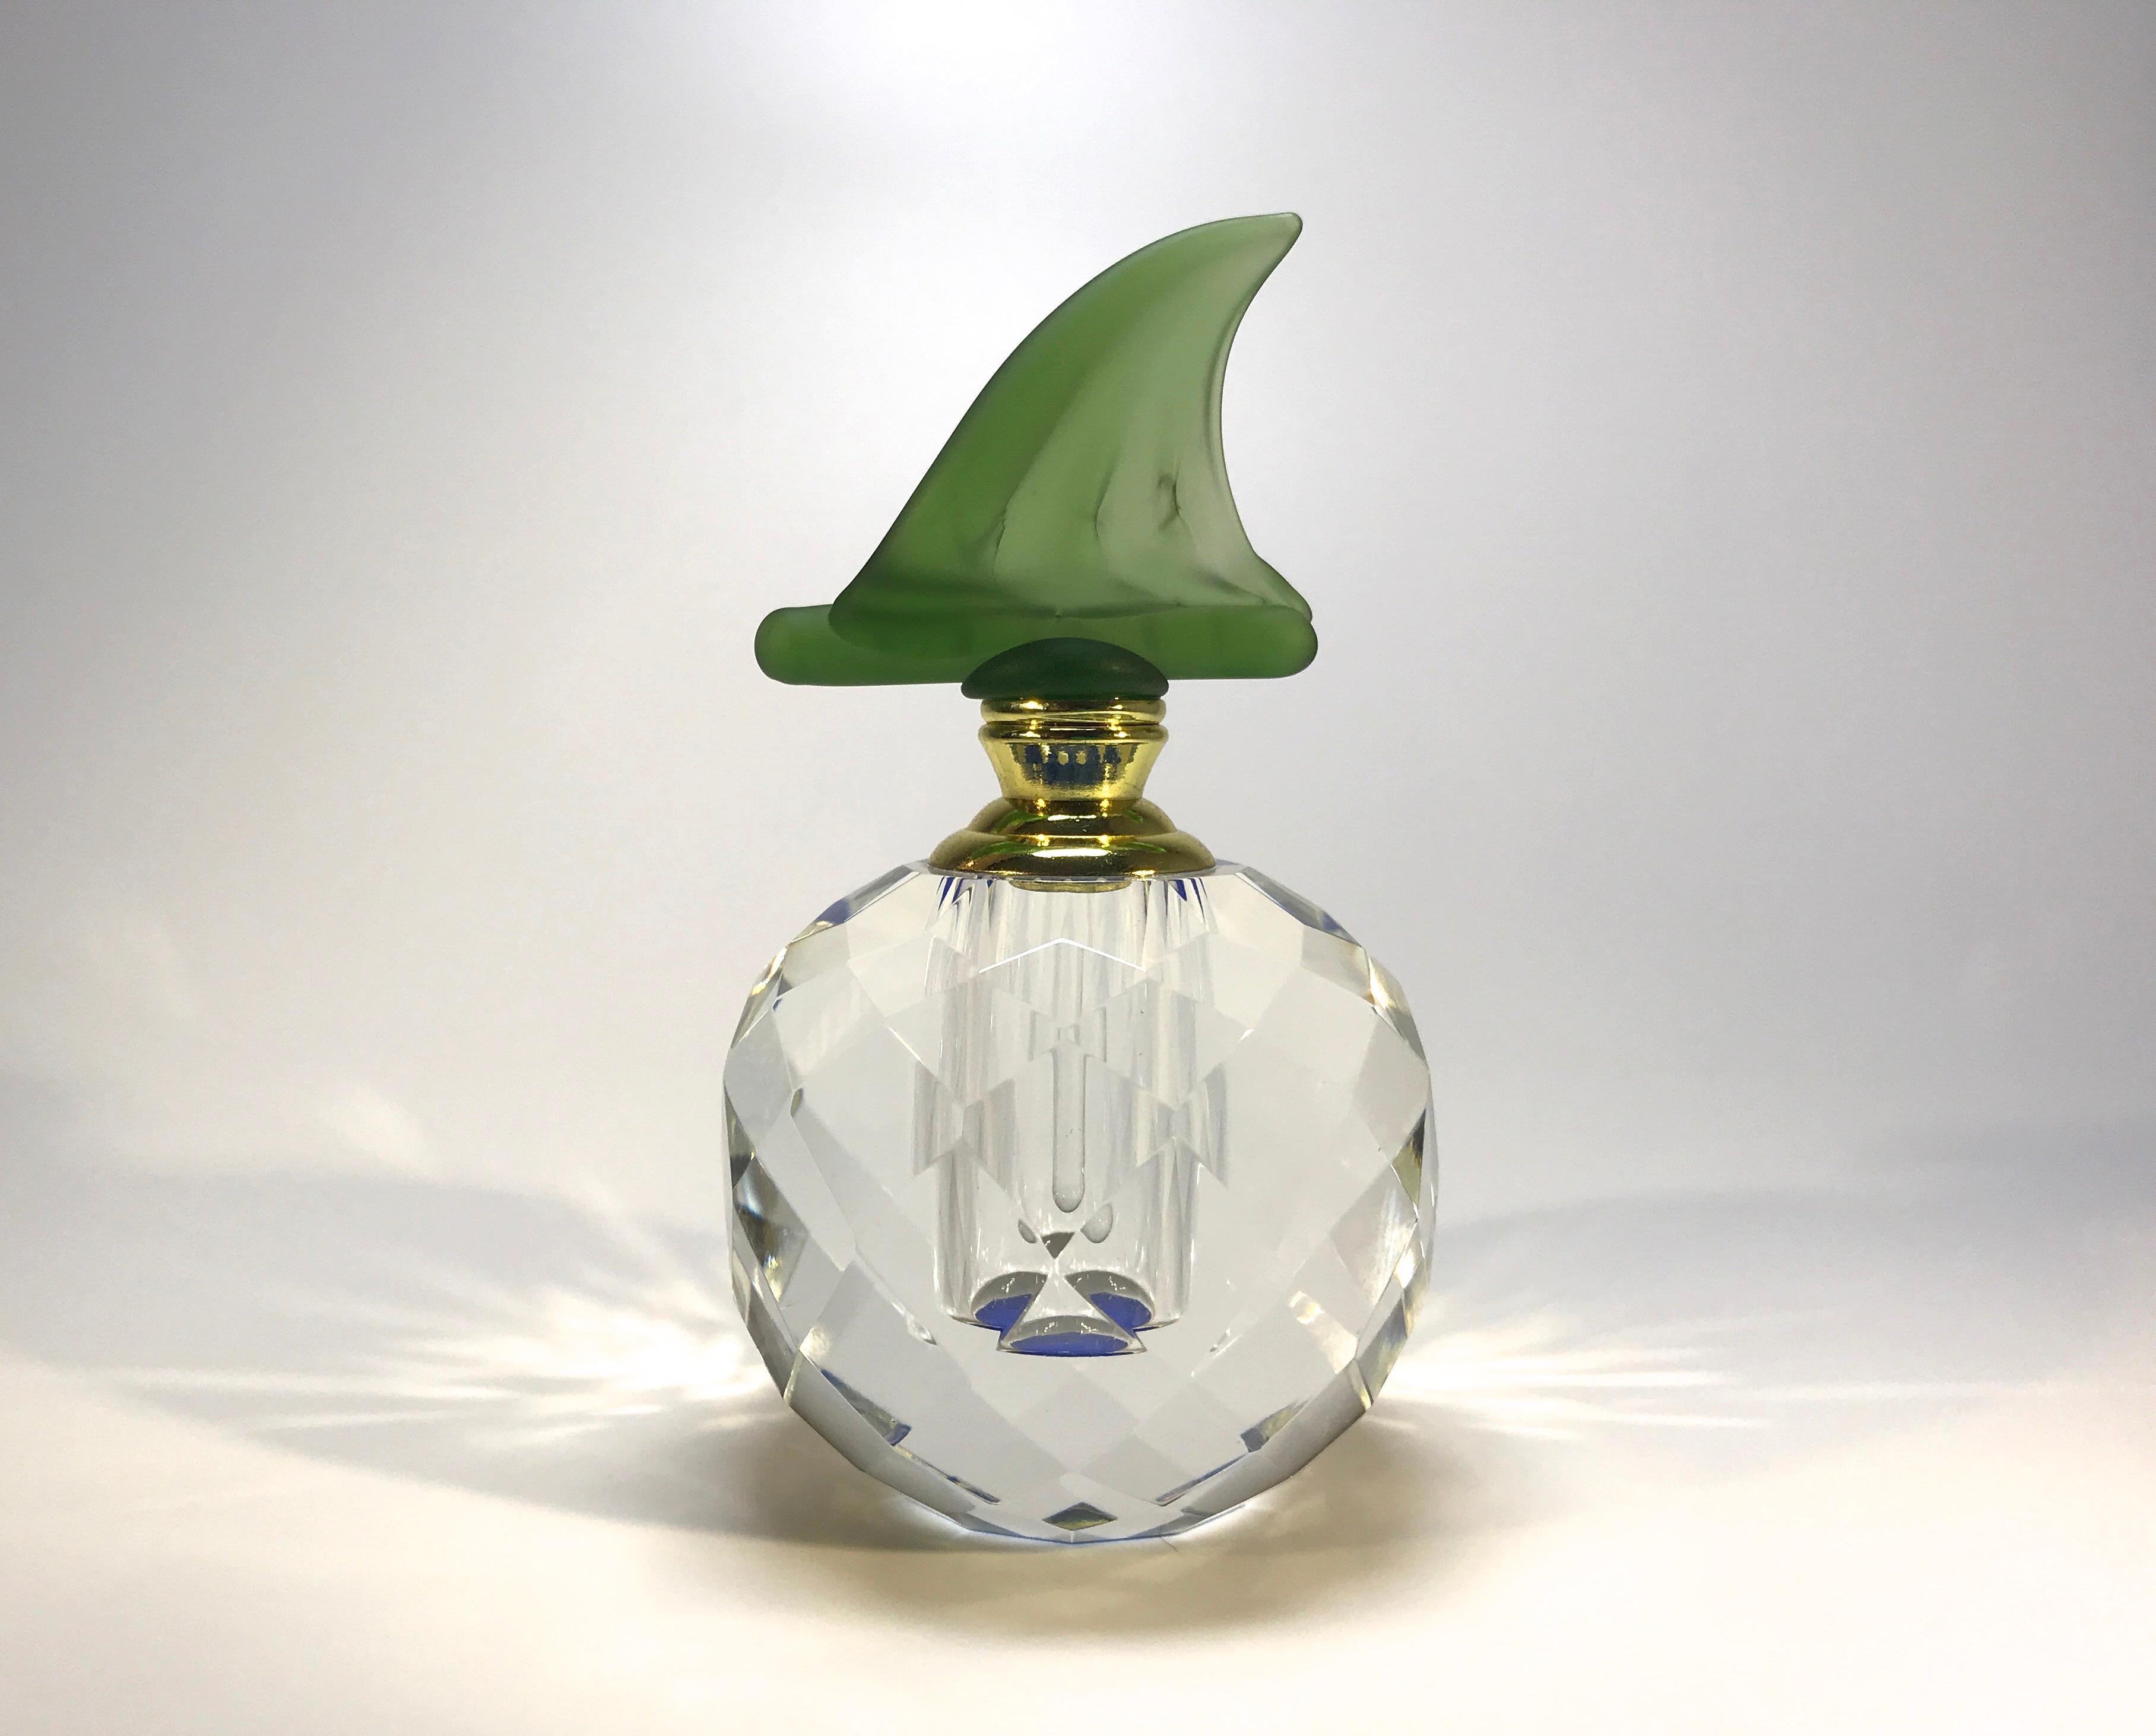 Absolutely exquisite crystal perfume bottle with a soft moss green Páte-de-Verre glass stopper
Gold colored collar. The glass pipet scent rod is in perfect condition
This piece has been carefully pre-owned and has a blue protective felt to the